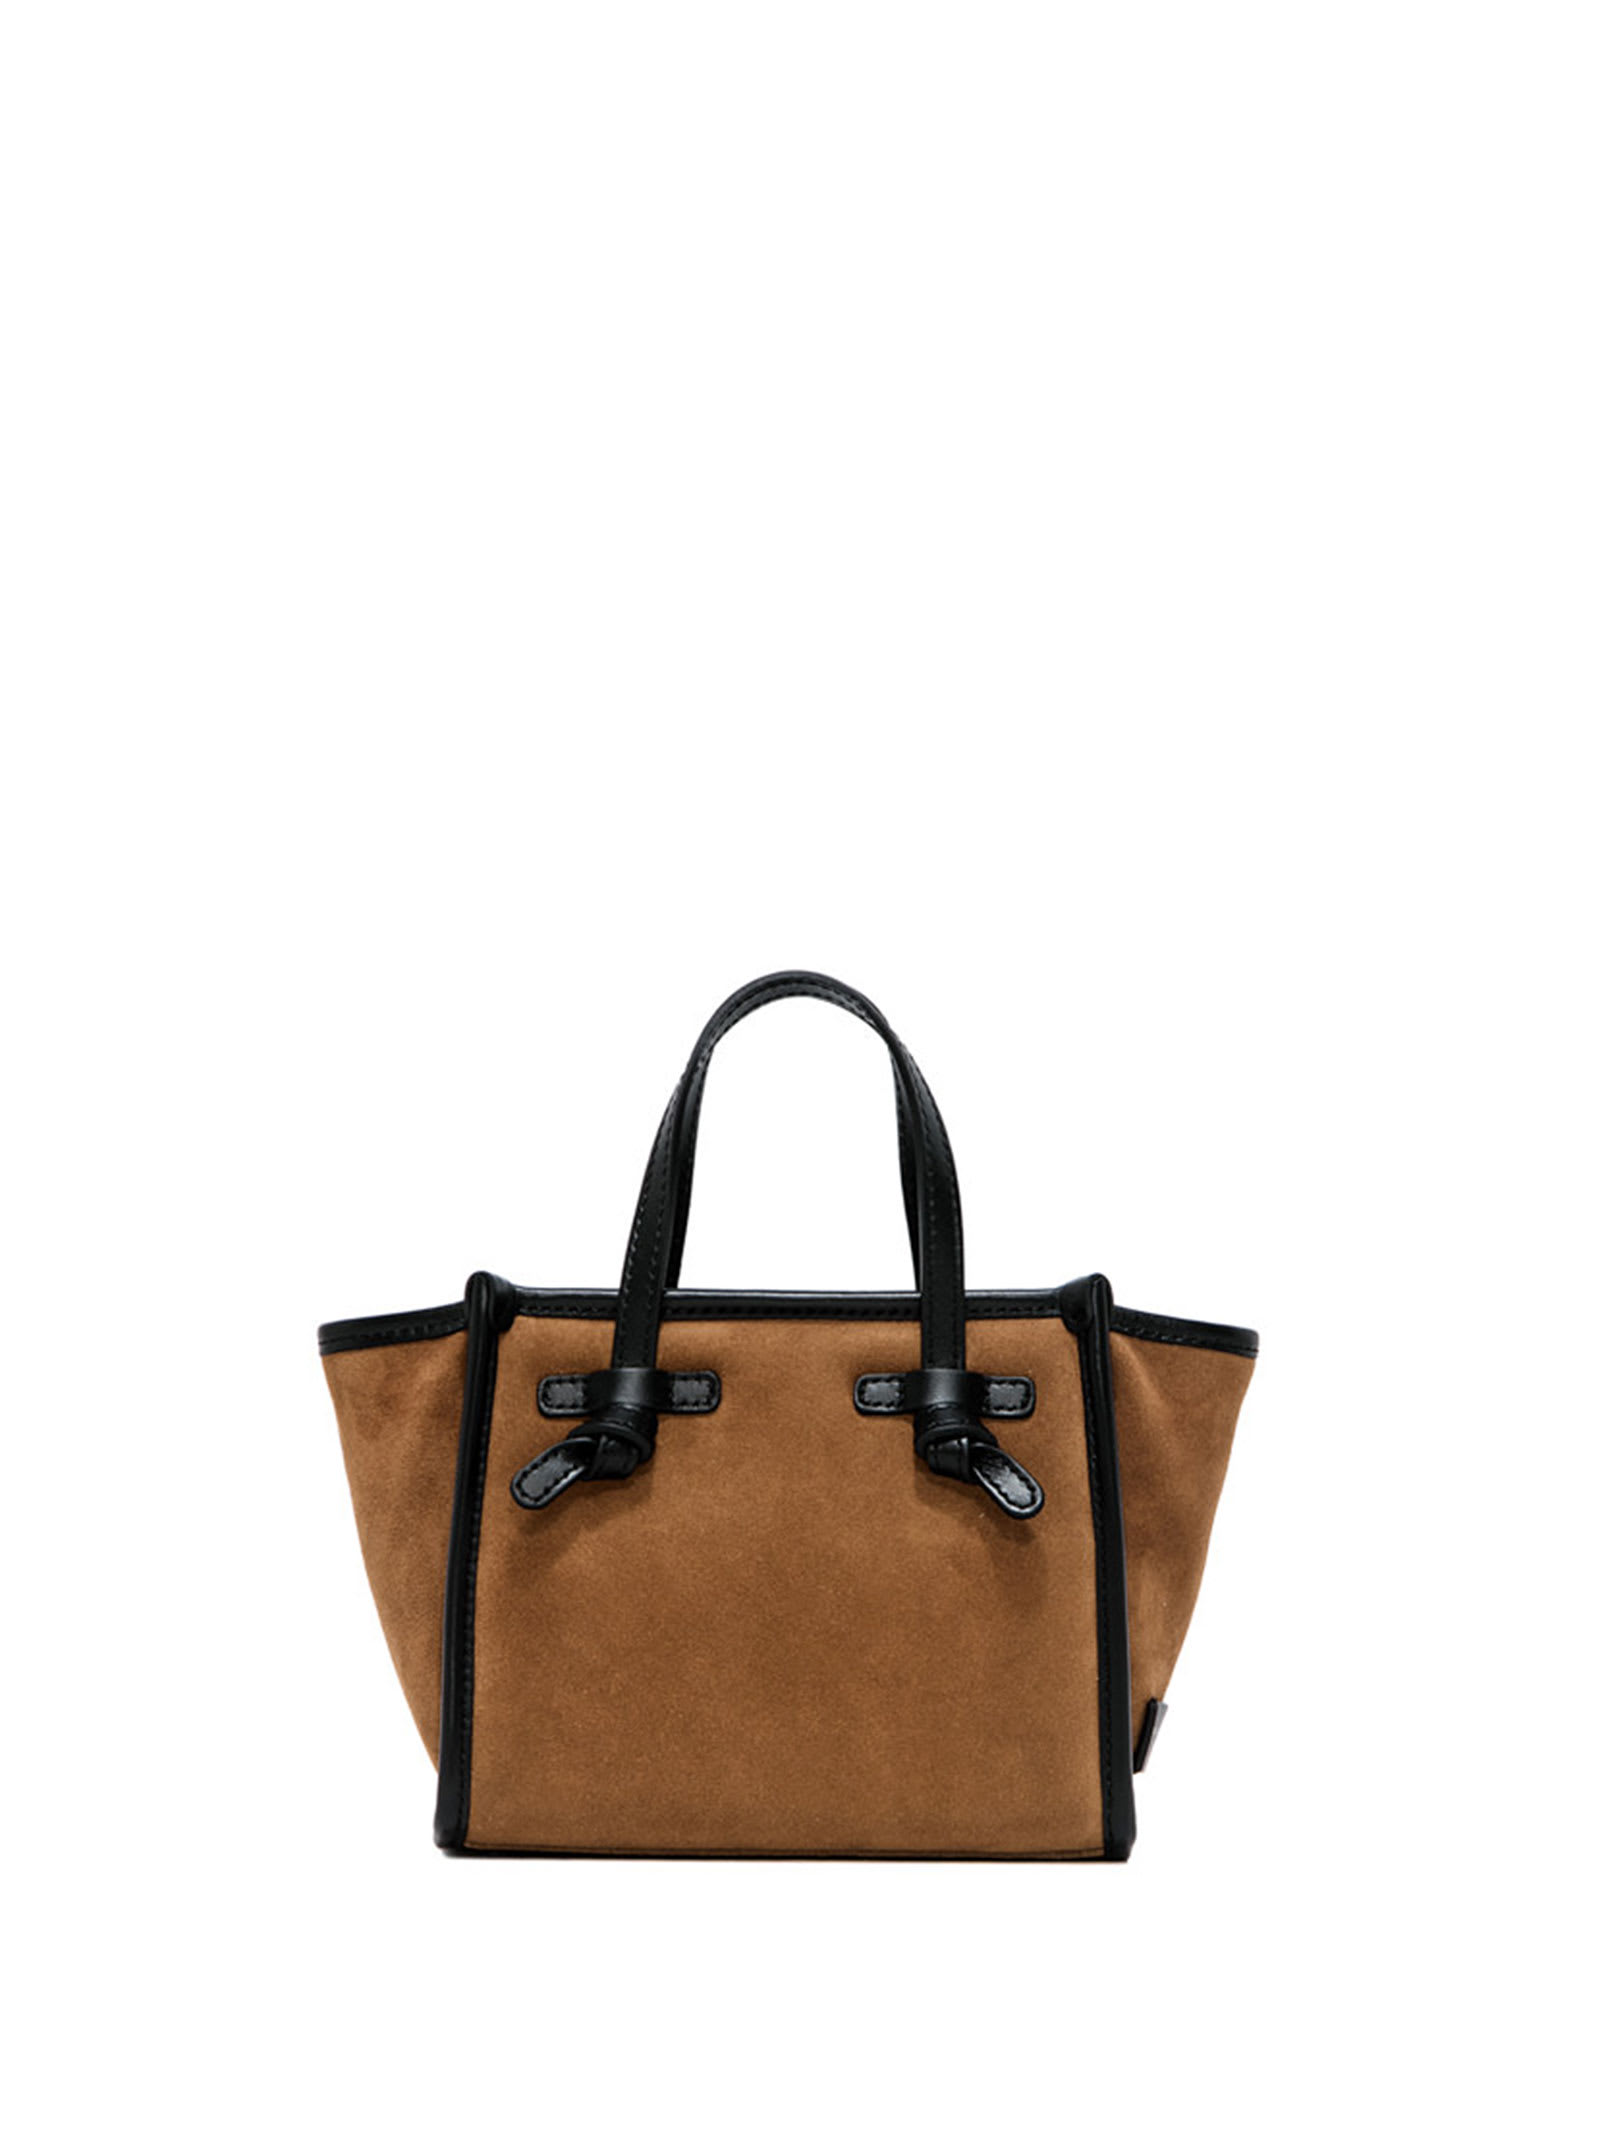 Gianni Chiarini Miss Marcella Bag With Leather Details